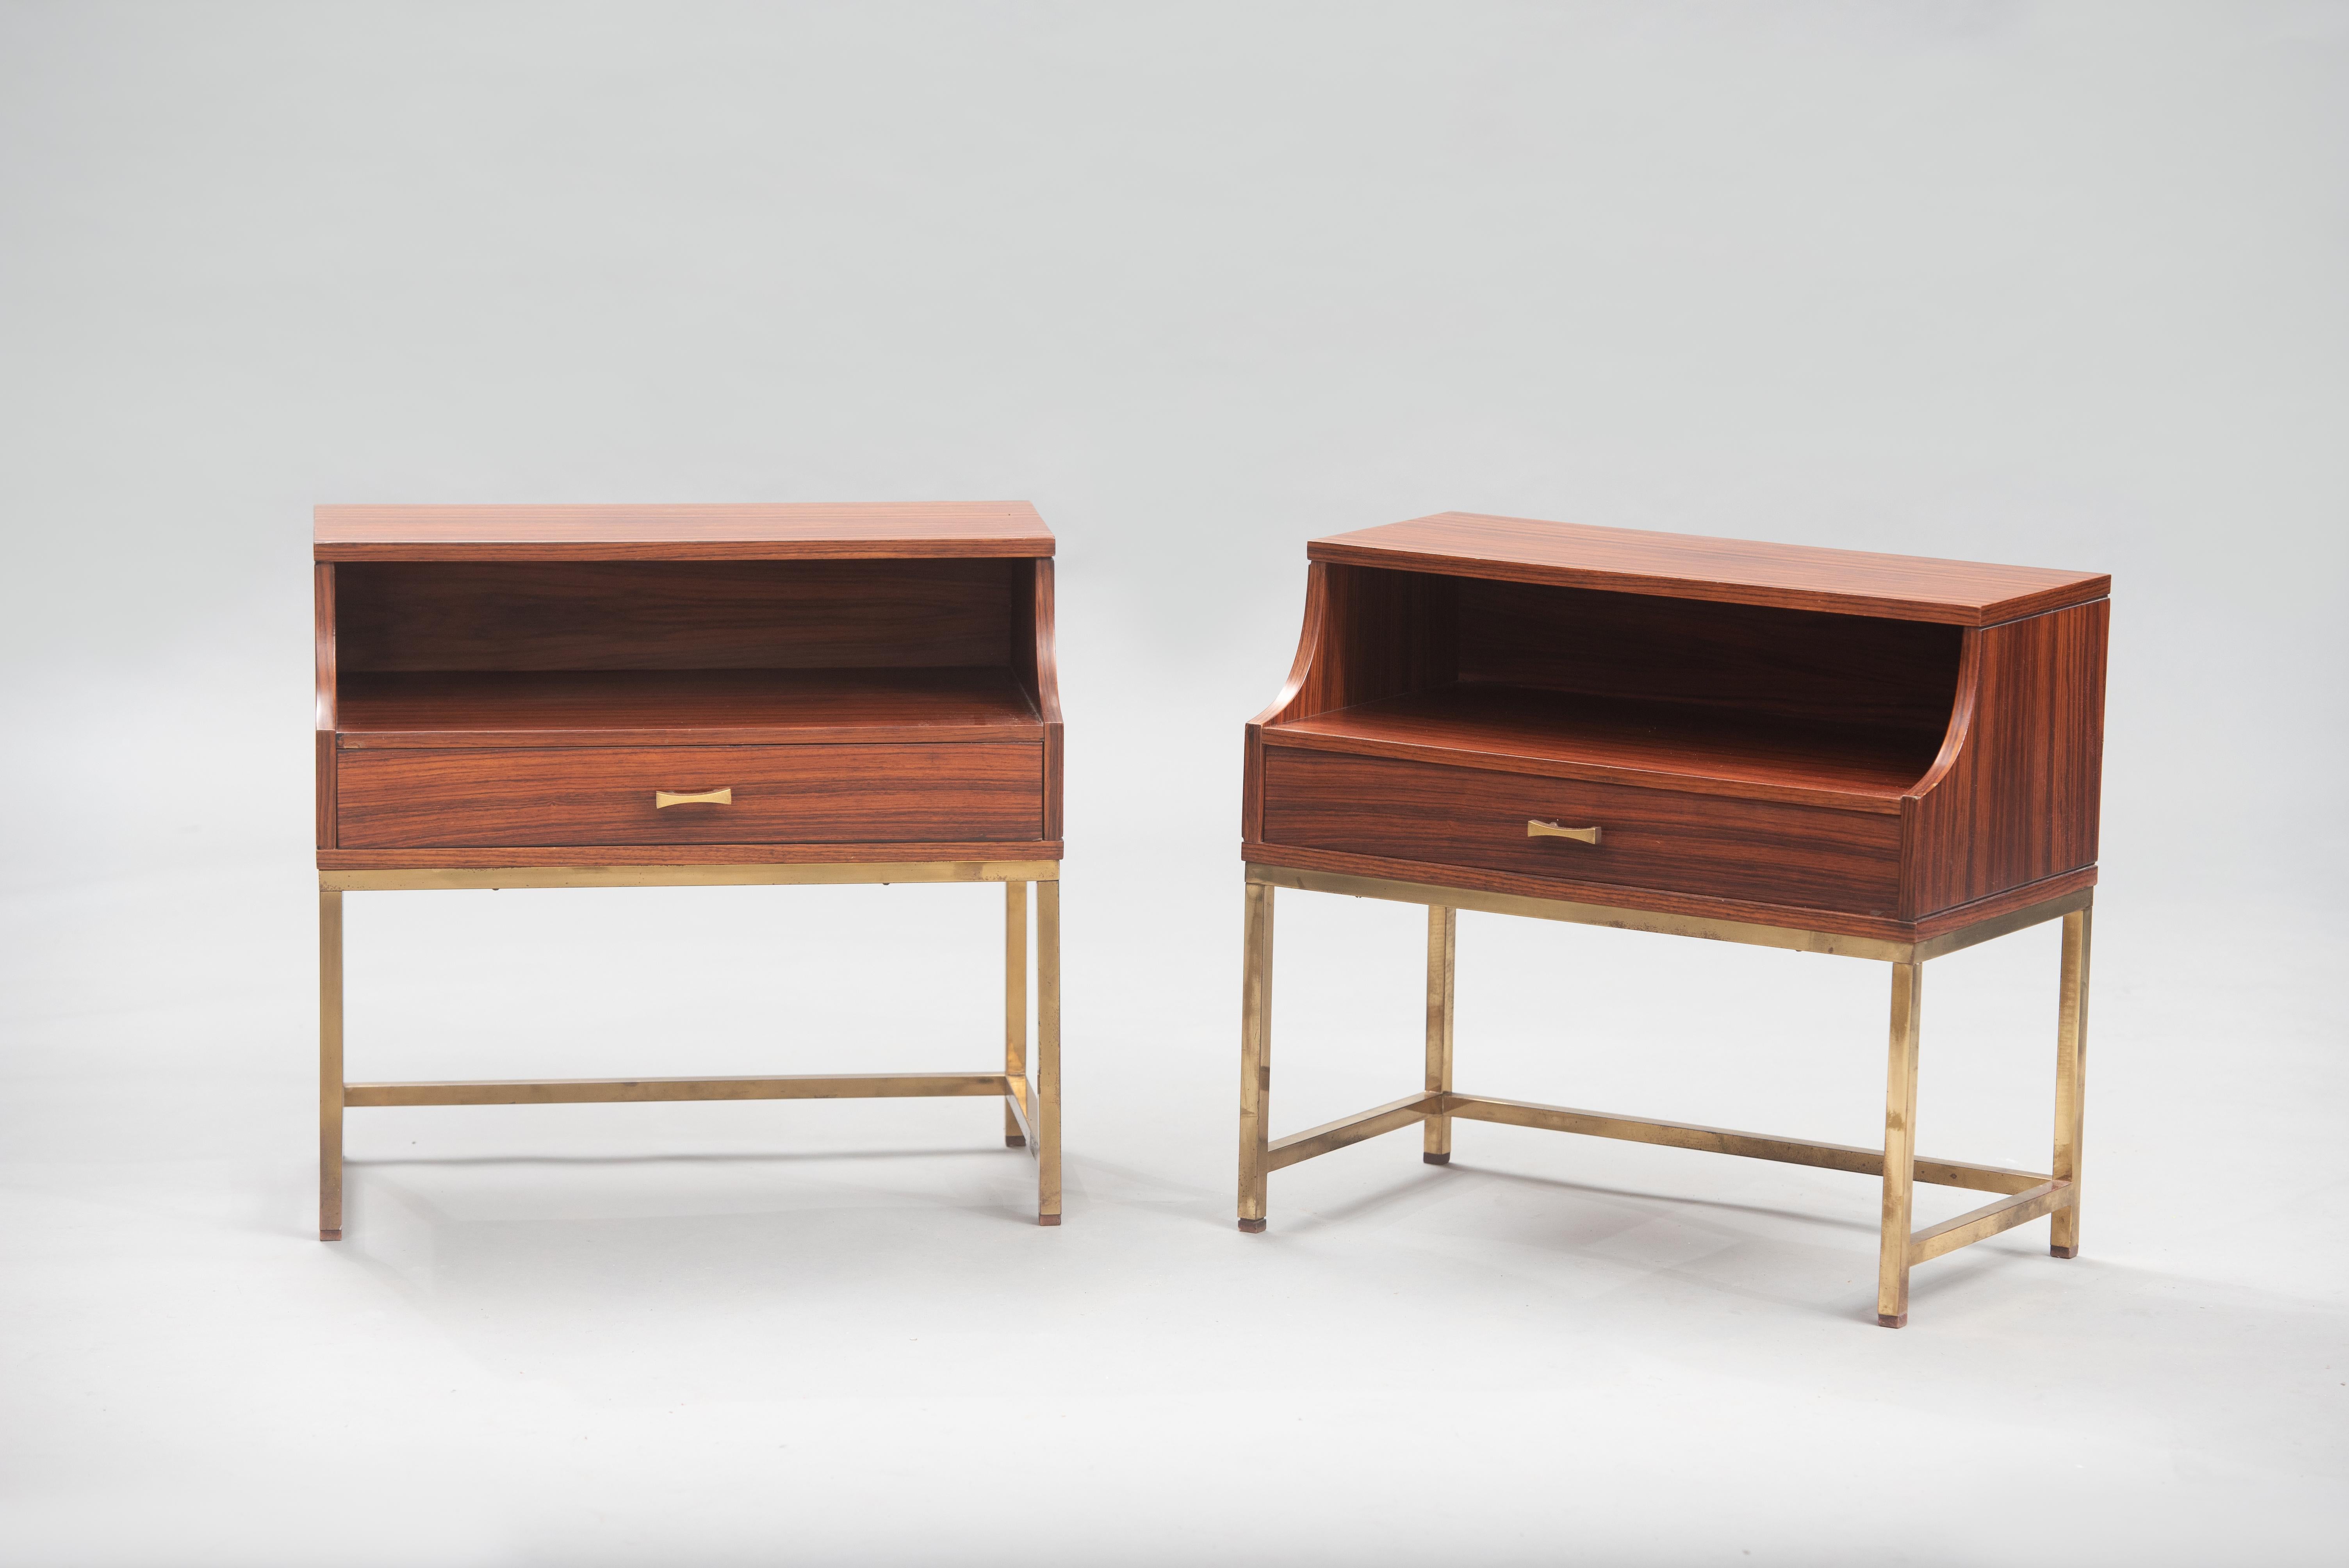 Set of two 1960s Italian Rosewood night stands, with brass legs and drawers handles.